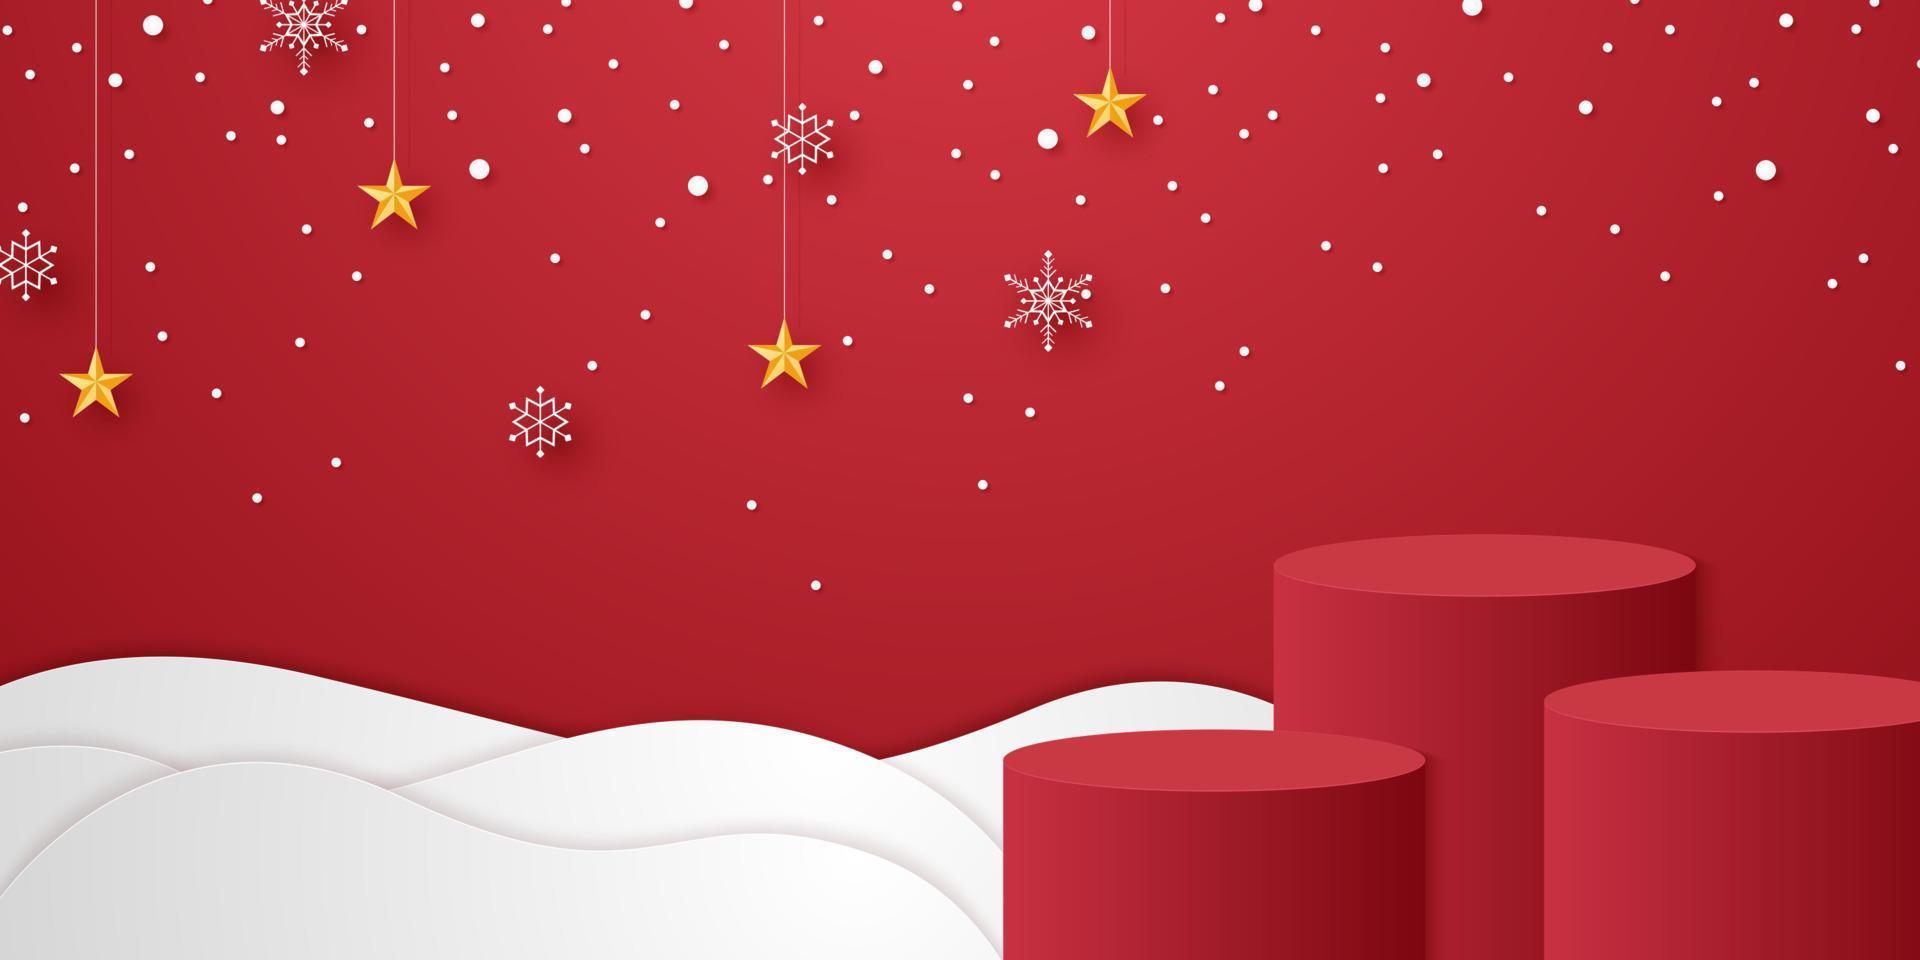 Red cylinder podium on snow with snowflakes and star hanging and snow falling, template mockup for Christmas event vector